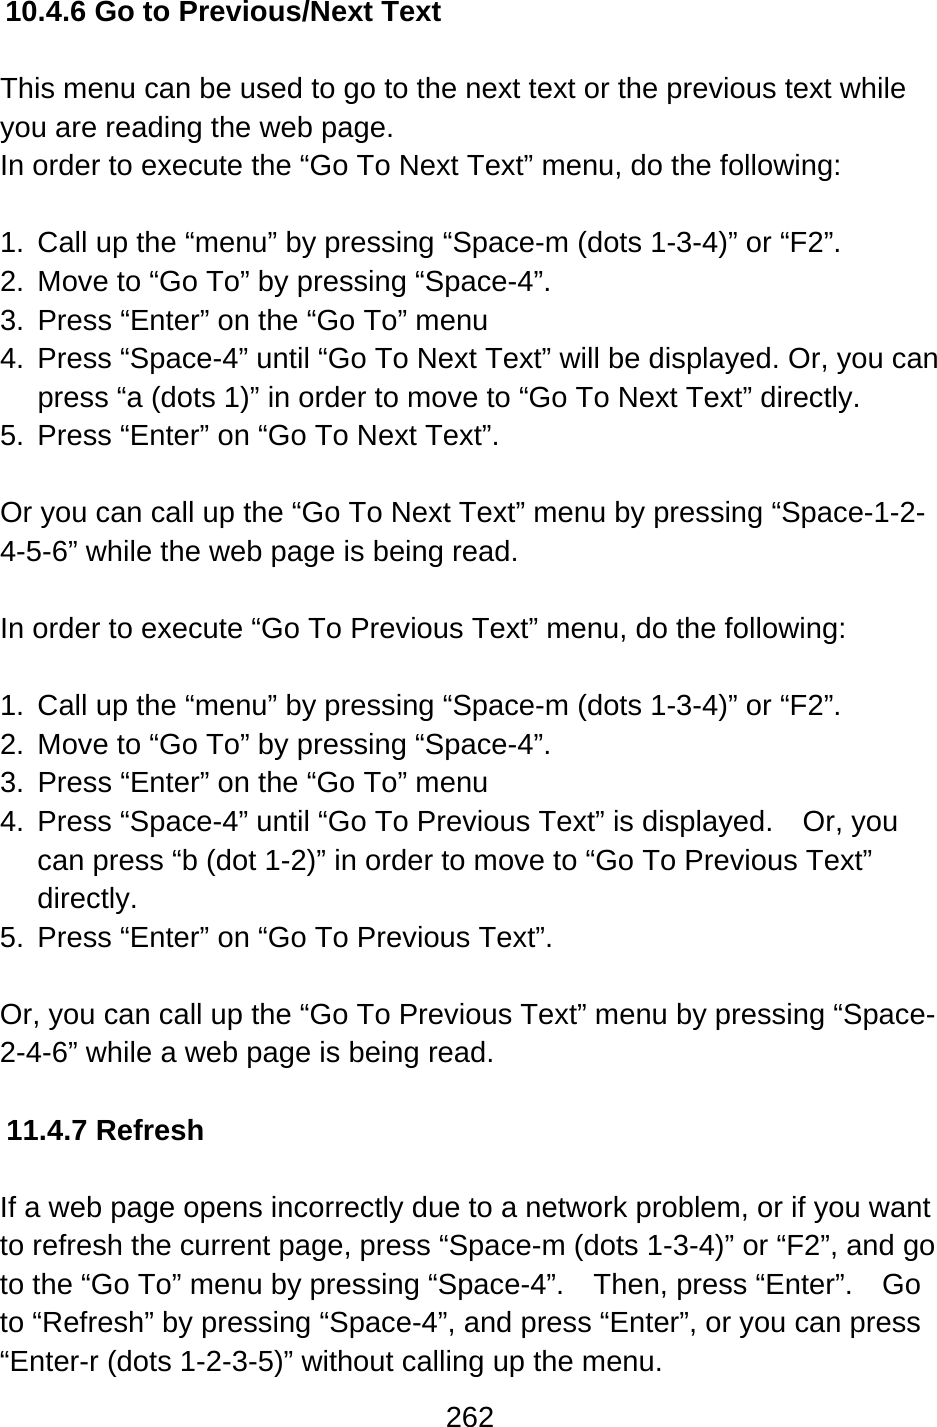 262  10.4.6 Go to Previous/Next Text  This menu can be used to go to the next text or the previous text while you are reading the web page. In order to execute the “Go To Next Text” menu, do the following:  1.  Call up the “menu” by pressing “Space-m (dots 1-3-4)” or “F2”. 2.  Move to “Go To” by pressing “Space-4”. 3. Press “Enter” on the “Go To” menu 4.  Press “Space-4” until “Go To Next Text” will be displayed. Or, you can press “a (dots 1)” in order to move to “Go To Next Text” directly. 5.  Press “Enter” on “Go To Next Text”.  Or you can call up the “Go To Next Text” menu by pressing “Space-1-2-4-5-6” while the web page is being read.  In order to execute “Go To Previous Text” menu, do the following:  1.  Call up the “menu” by pressing “Space-m (dots 1-3-4)” or “F2”. 2.  Move to “Go To” by pressing “Space-4”. 3. Press “Enter” on the “Go To” menu 4.  Press “Space-4” until “Go To Previous Text” is displayed.    Or, you can press “b (dot 1-2)” in order to move to “Go To Previous Text” directly. 5.  Press “Enter” on “Go To Previous Text”.  Or, you can call up the “Go To Previous Text” menu by pressing “Space-2-4-6” while a web page is being read.  11.4.7 Refresh  If a web page opens incorrectly due to a network problem, or if you want to refresh the current page, press “Space-m (dots 1-3-4)” or “F2”, and go to the “Go To” menu by pressing “Space-4”.    Then, press “Enter”.    Go to “Refresh” by pressing “Space-4”, and press “Enter”, or you can press “Enter-r (dots 1-2-3-5)” without calling up the menu. 